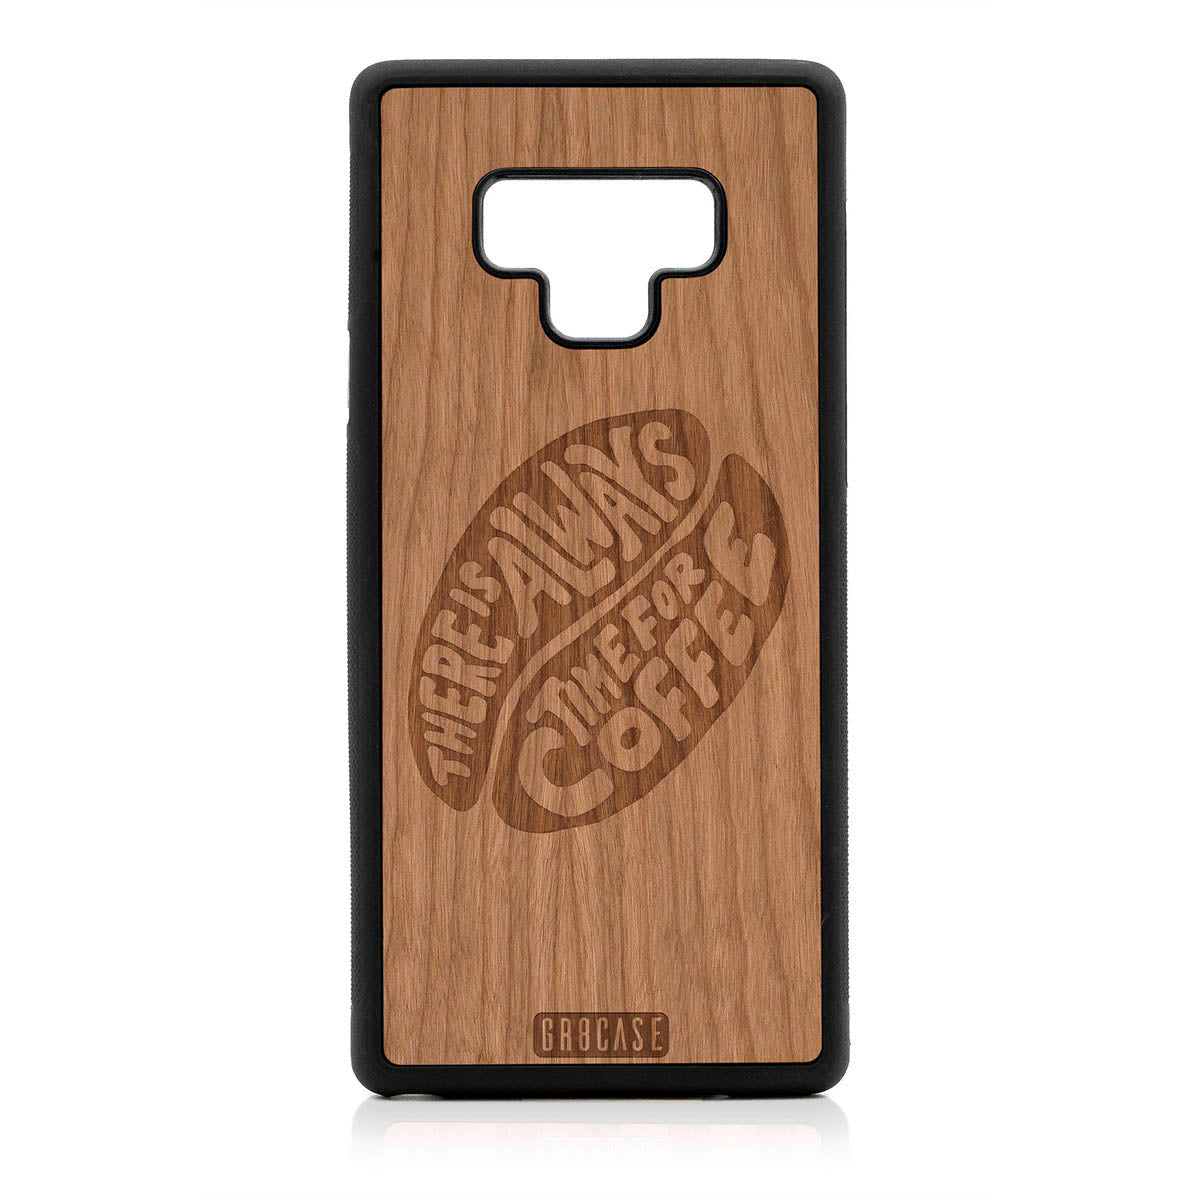 There Is Always Time For Coffee Design Wood Case For Samsung Galaxy Note 9